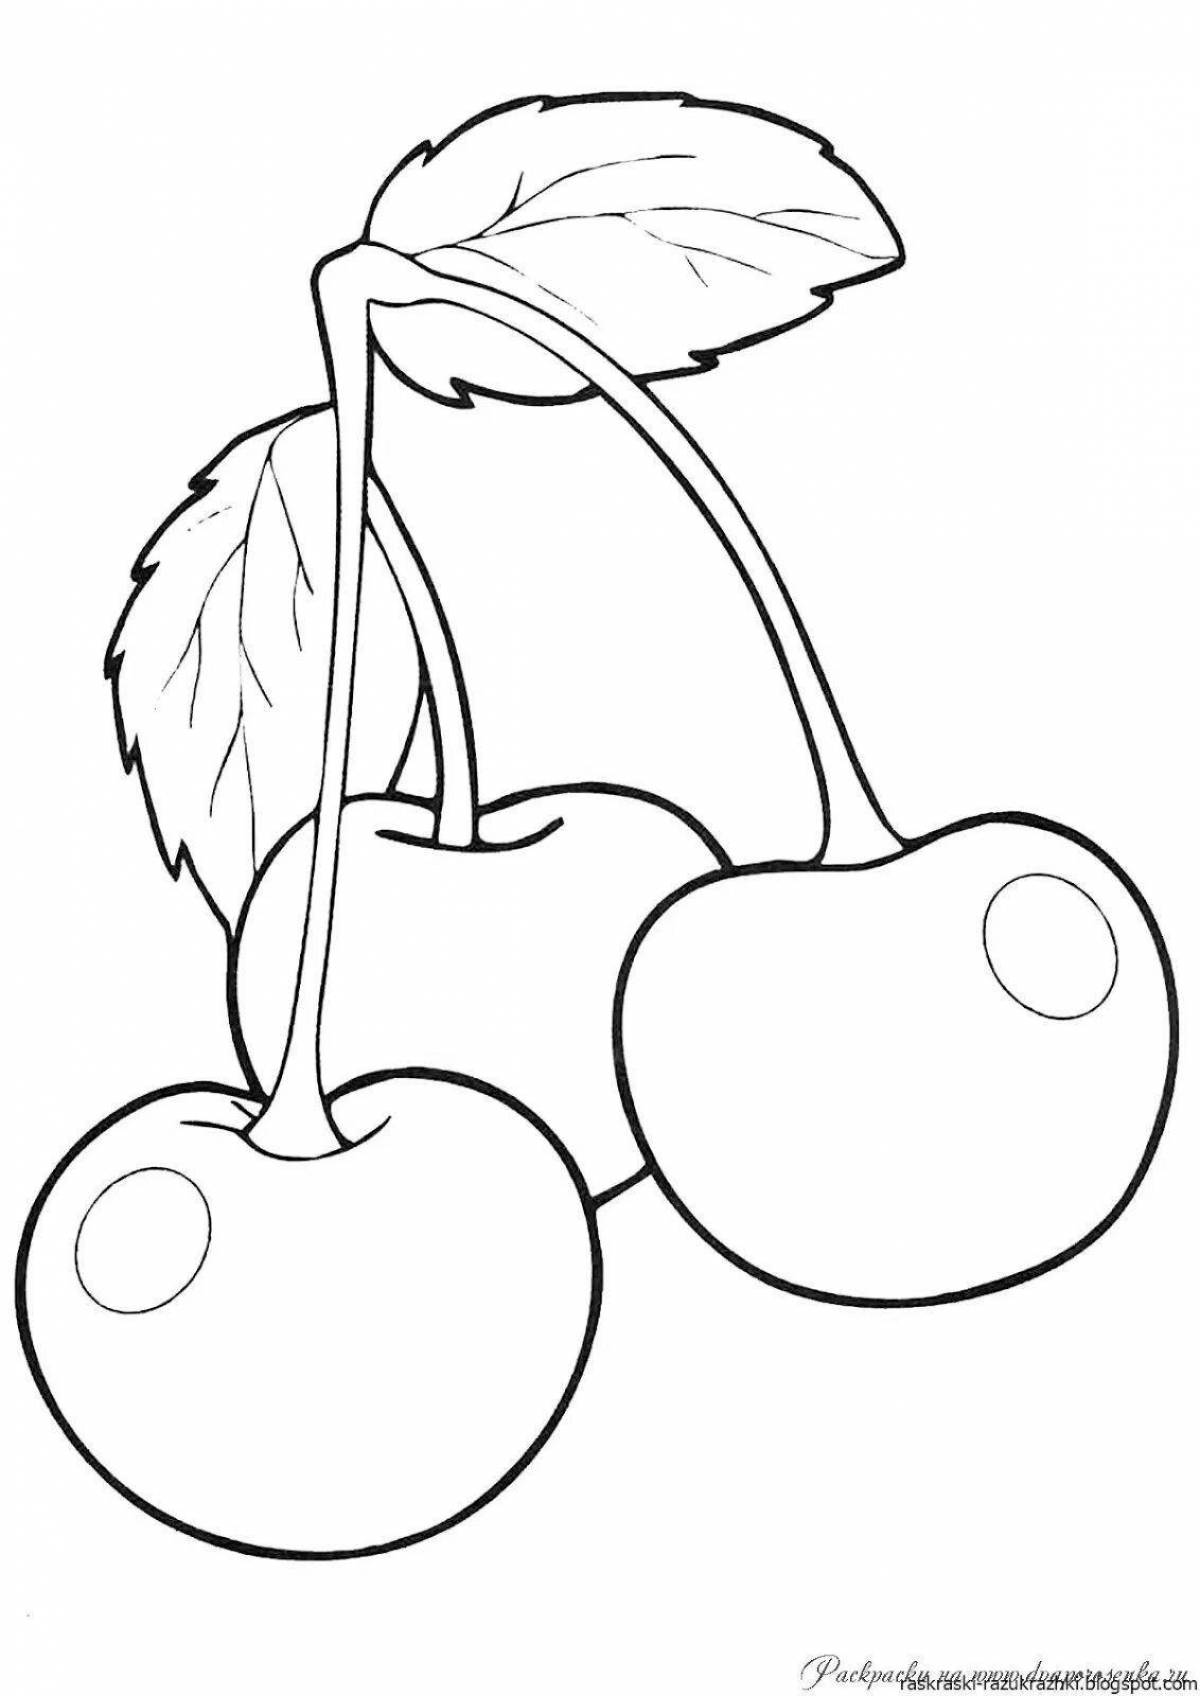 Amazing berries and fruits coloring pages for kids